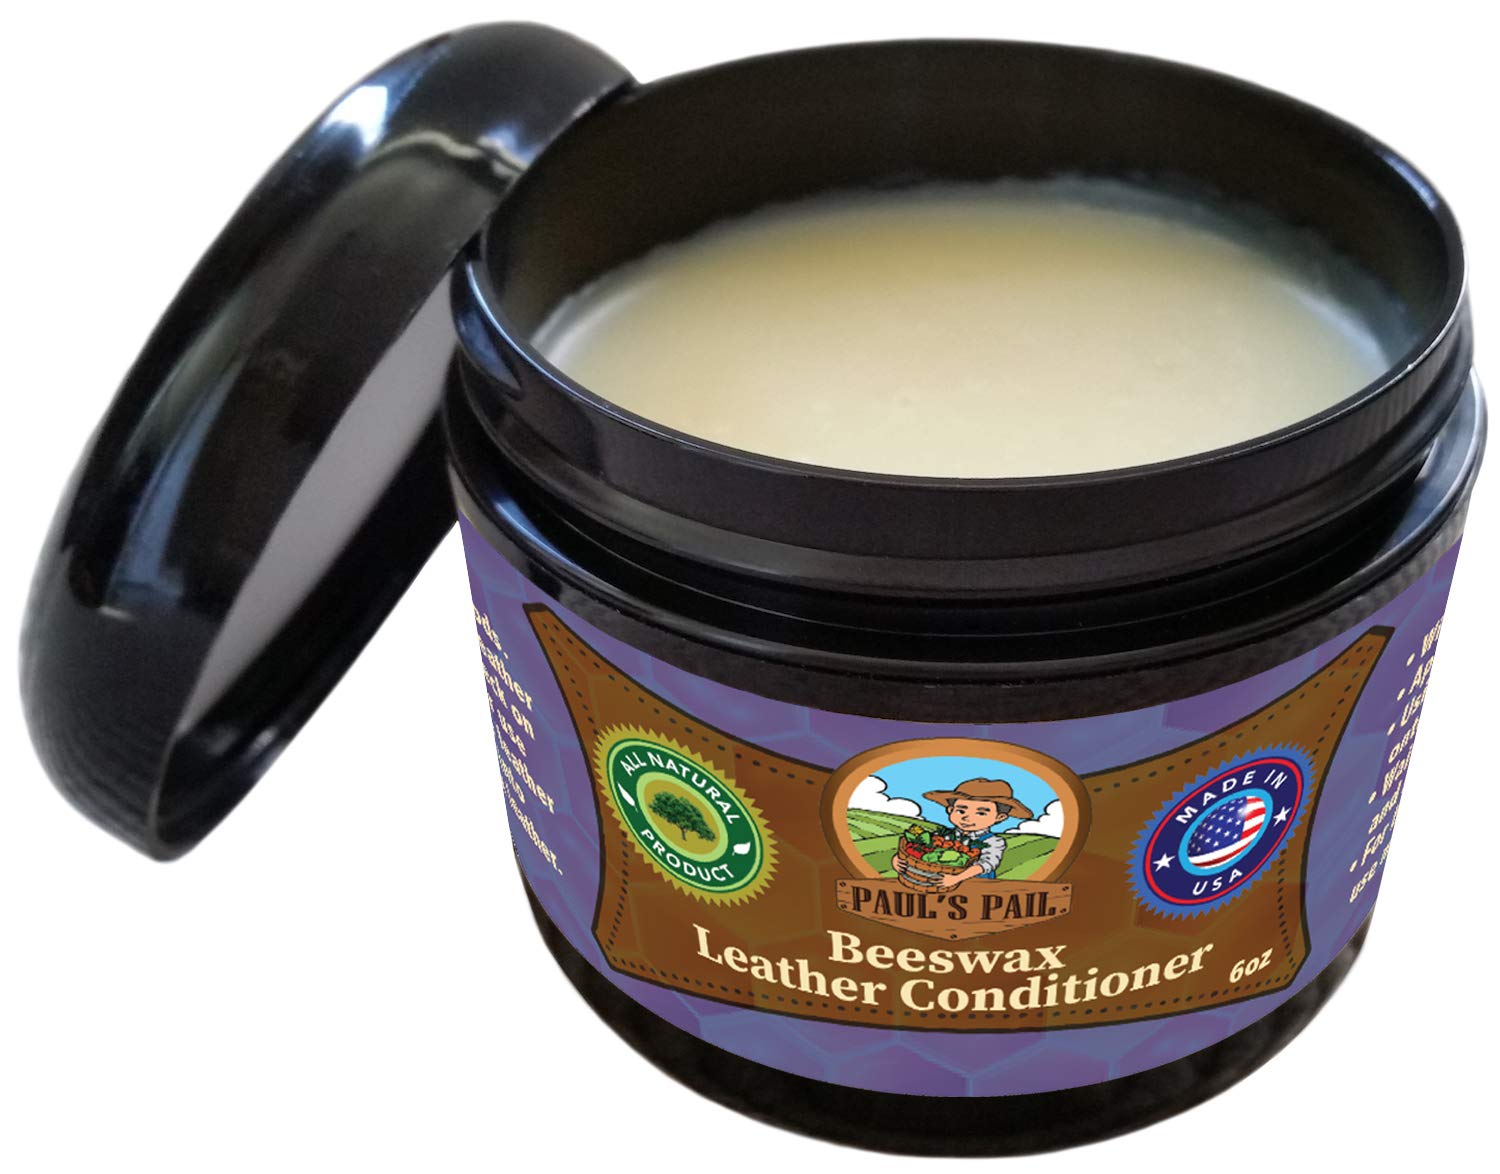 Paul's Pail All Natural Beeswax Leather Conditioner